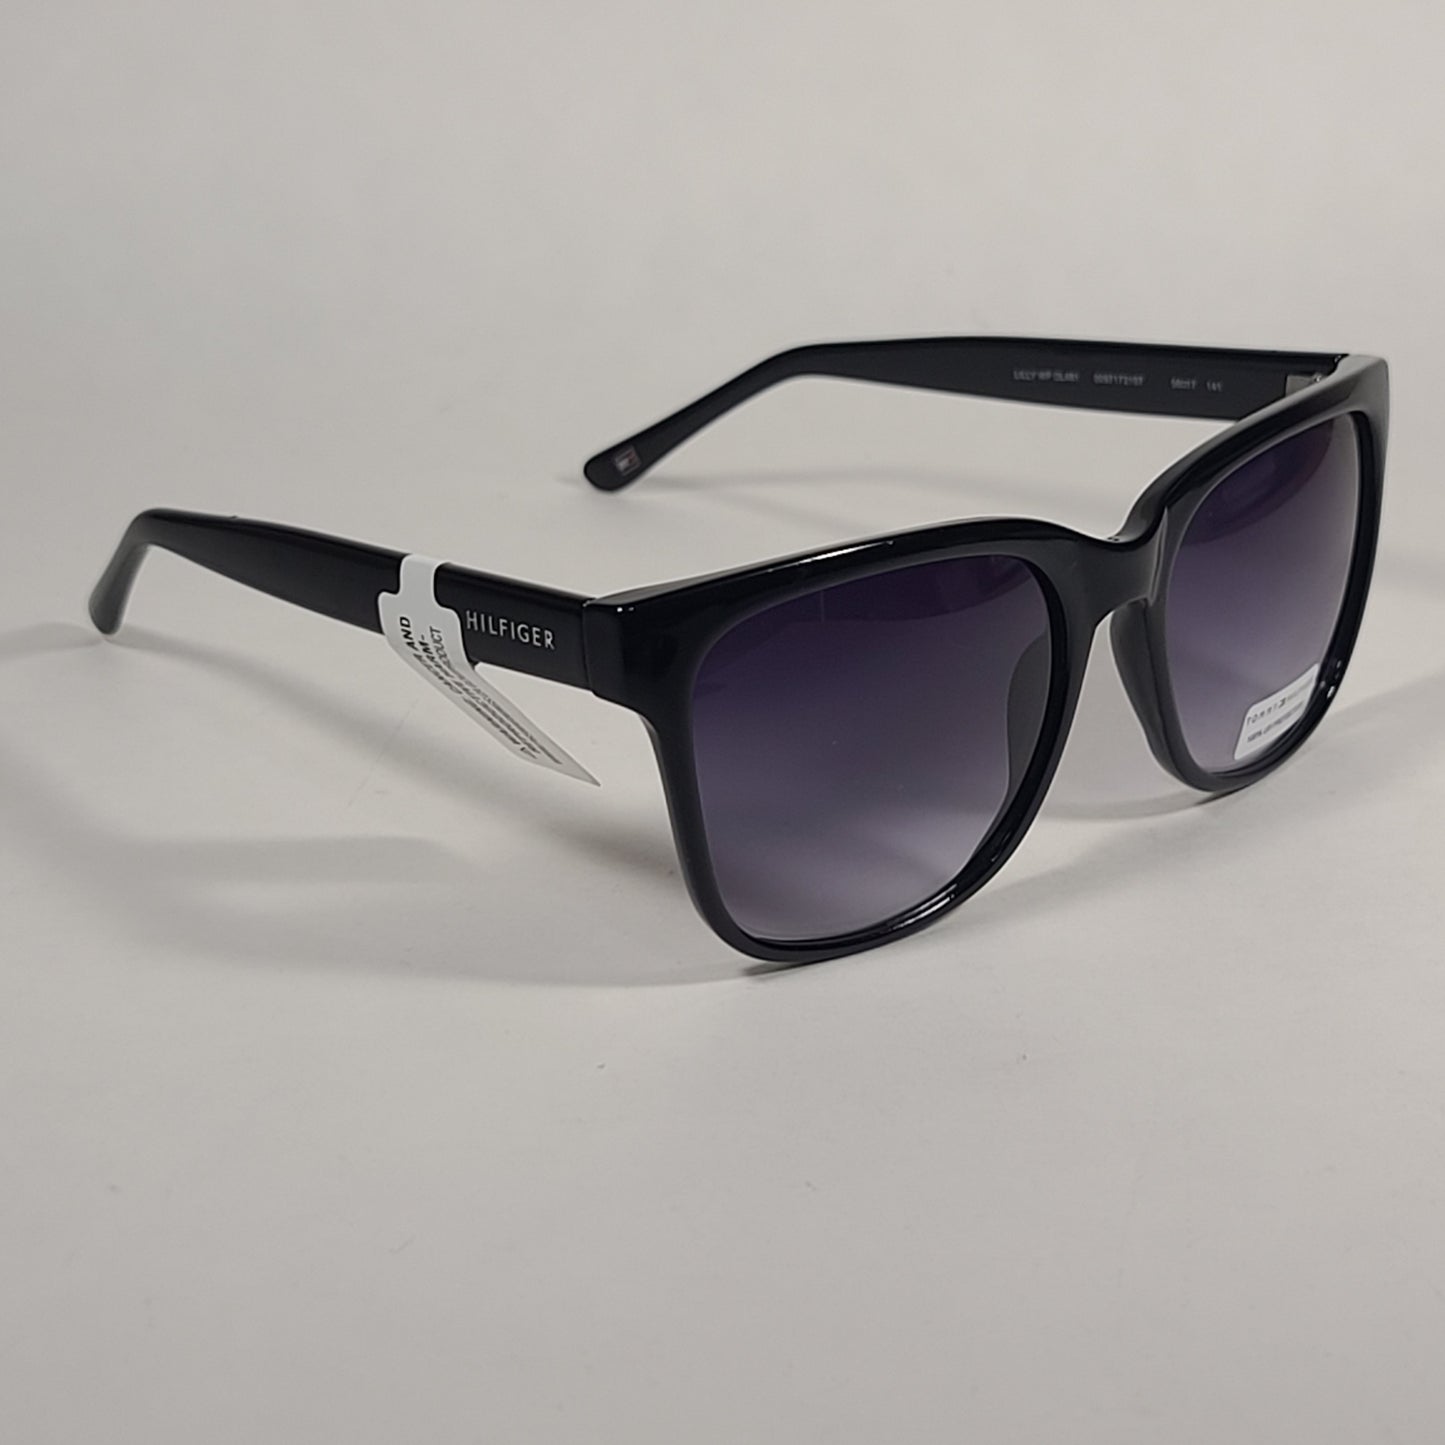 Tommy Hilfiger Lilly Square Sunglasses Shiny Black Frame Smoke Gradient Lens LILLY WP OL481 - Sunglasses